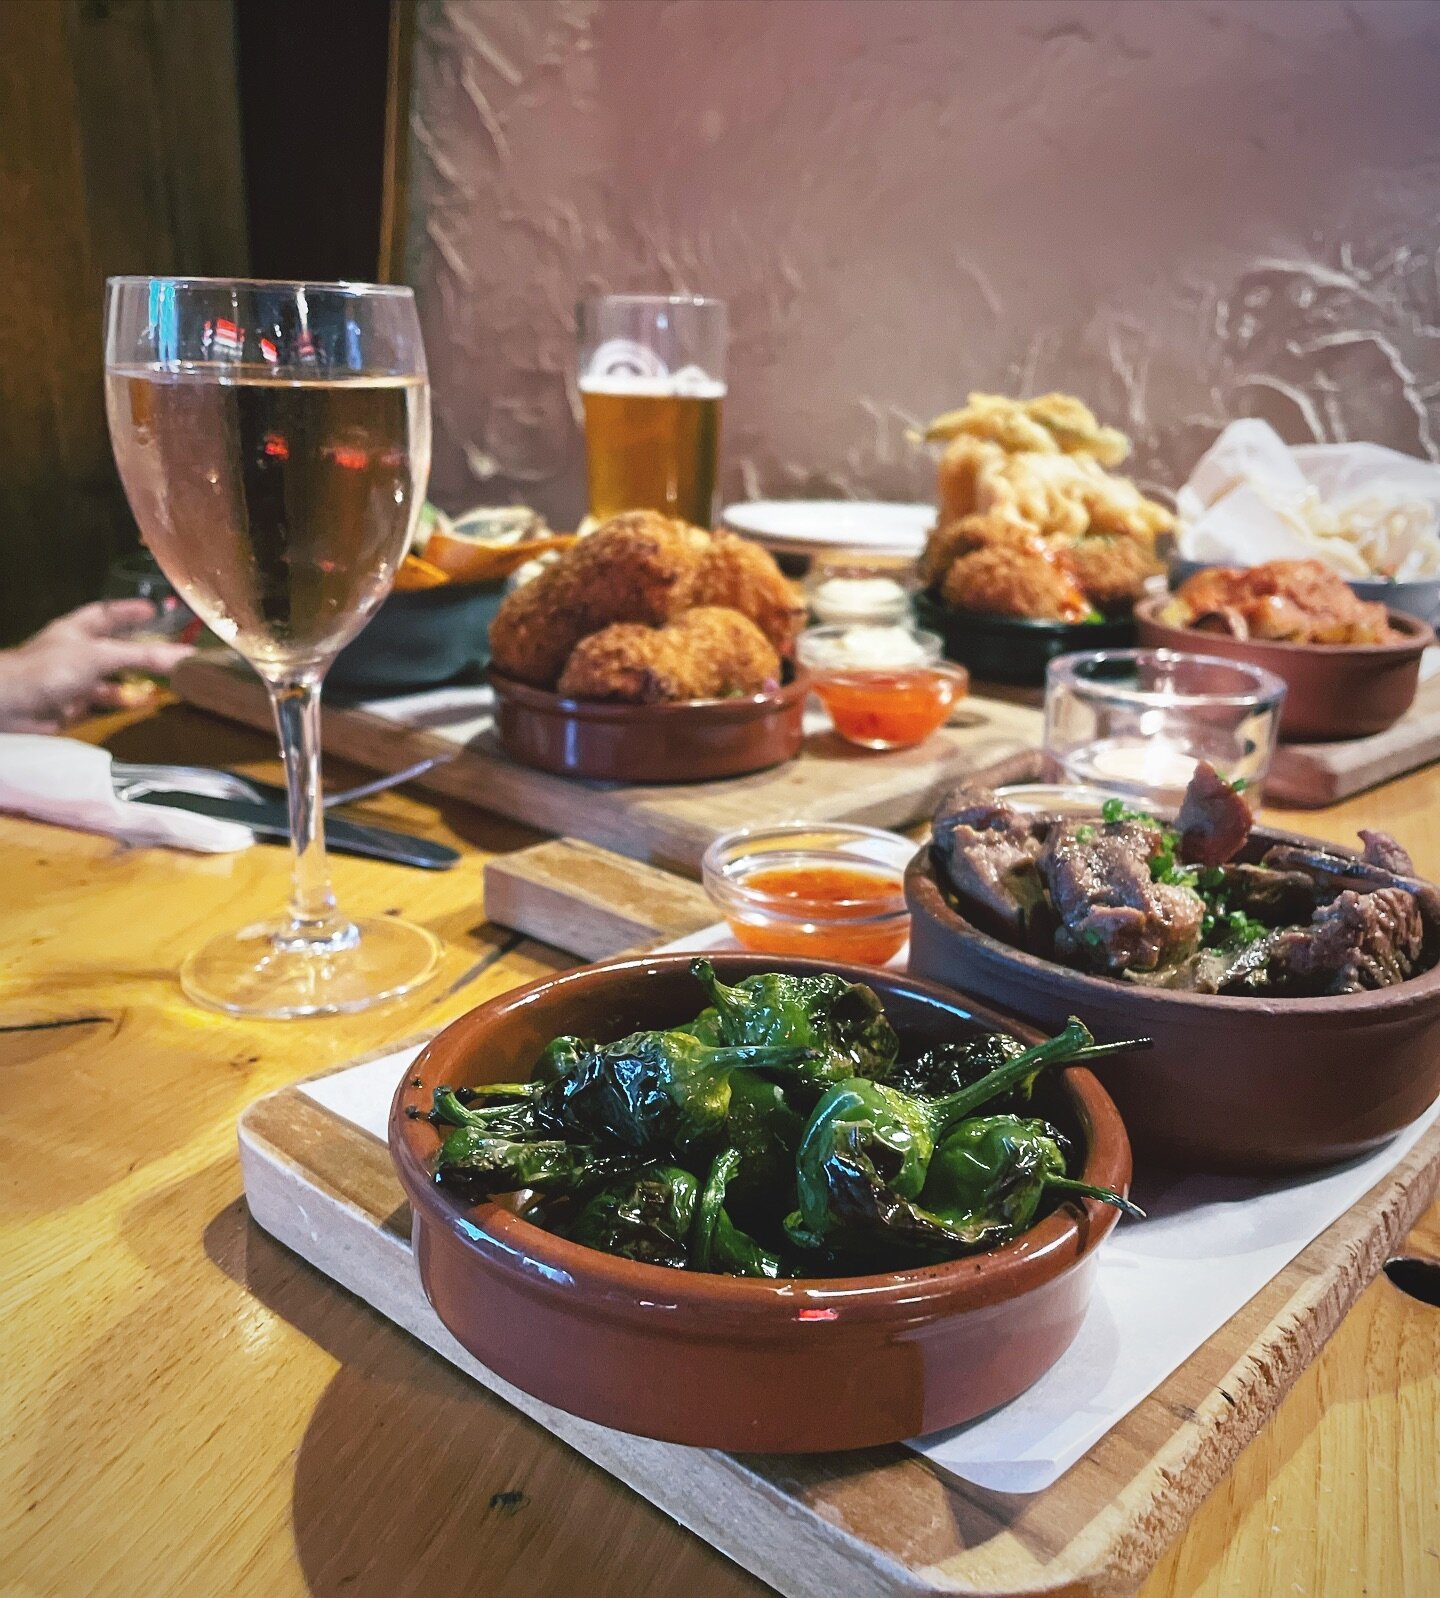 Tapas nights | Monday evenings 6pm-8.30pm 

Lots of delicious veggie | meat | fish options. 🥕🥩🐟

Escape the cold and book in for one of our themed evenings. Tapas is very popular at The Filo so booking is suggested.